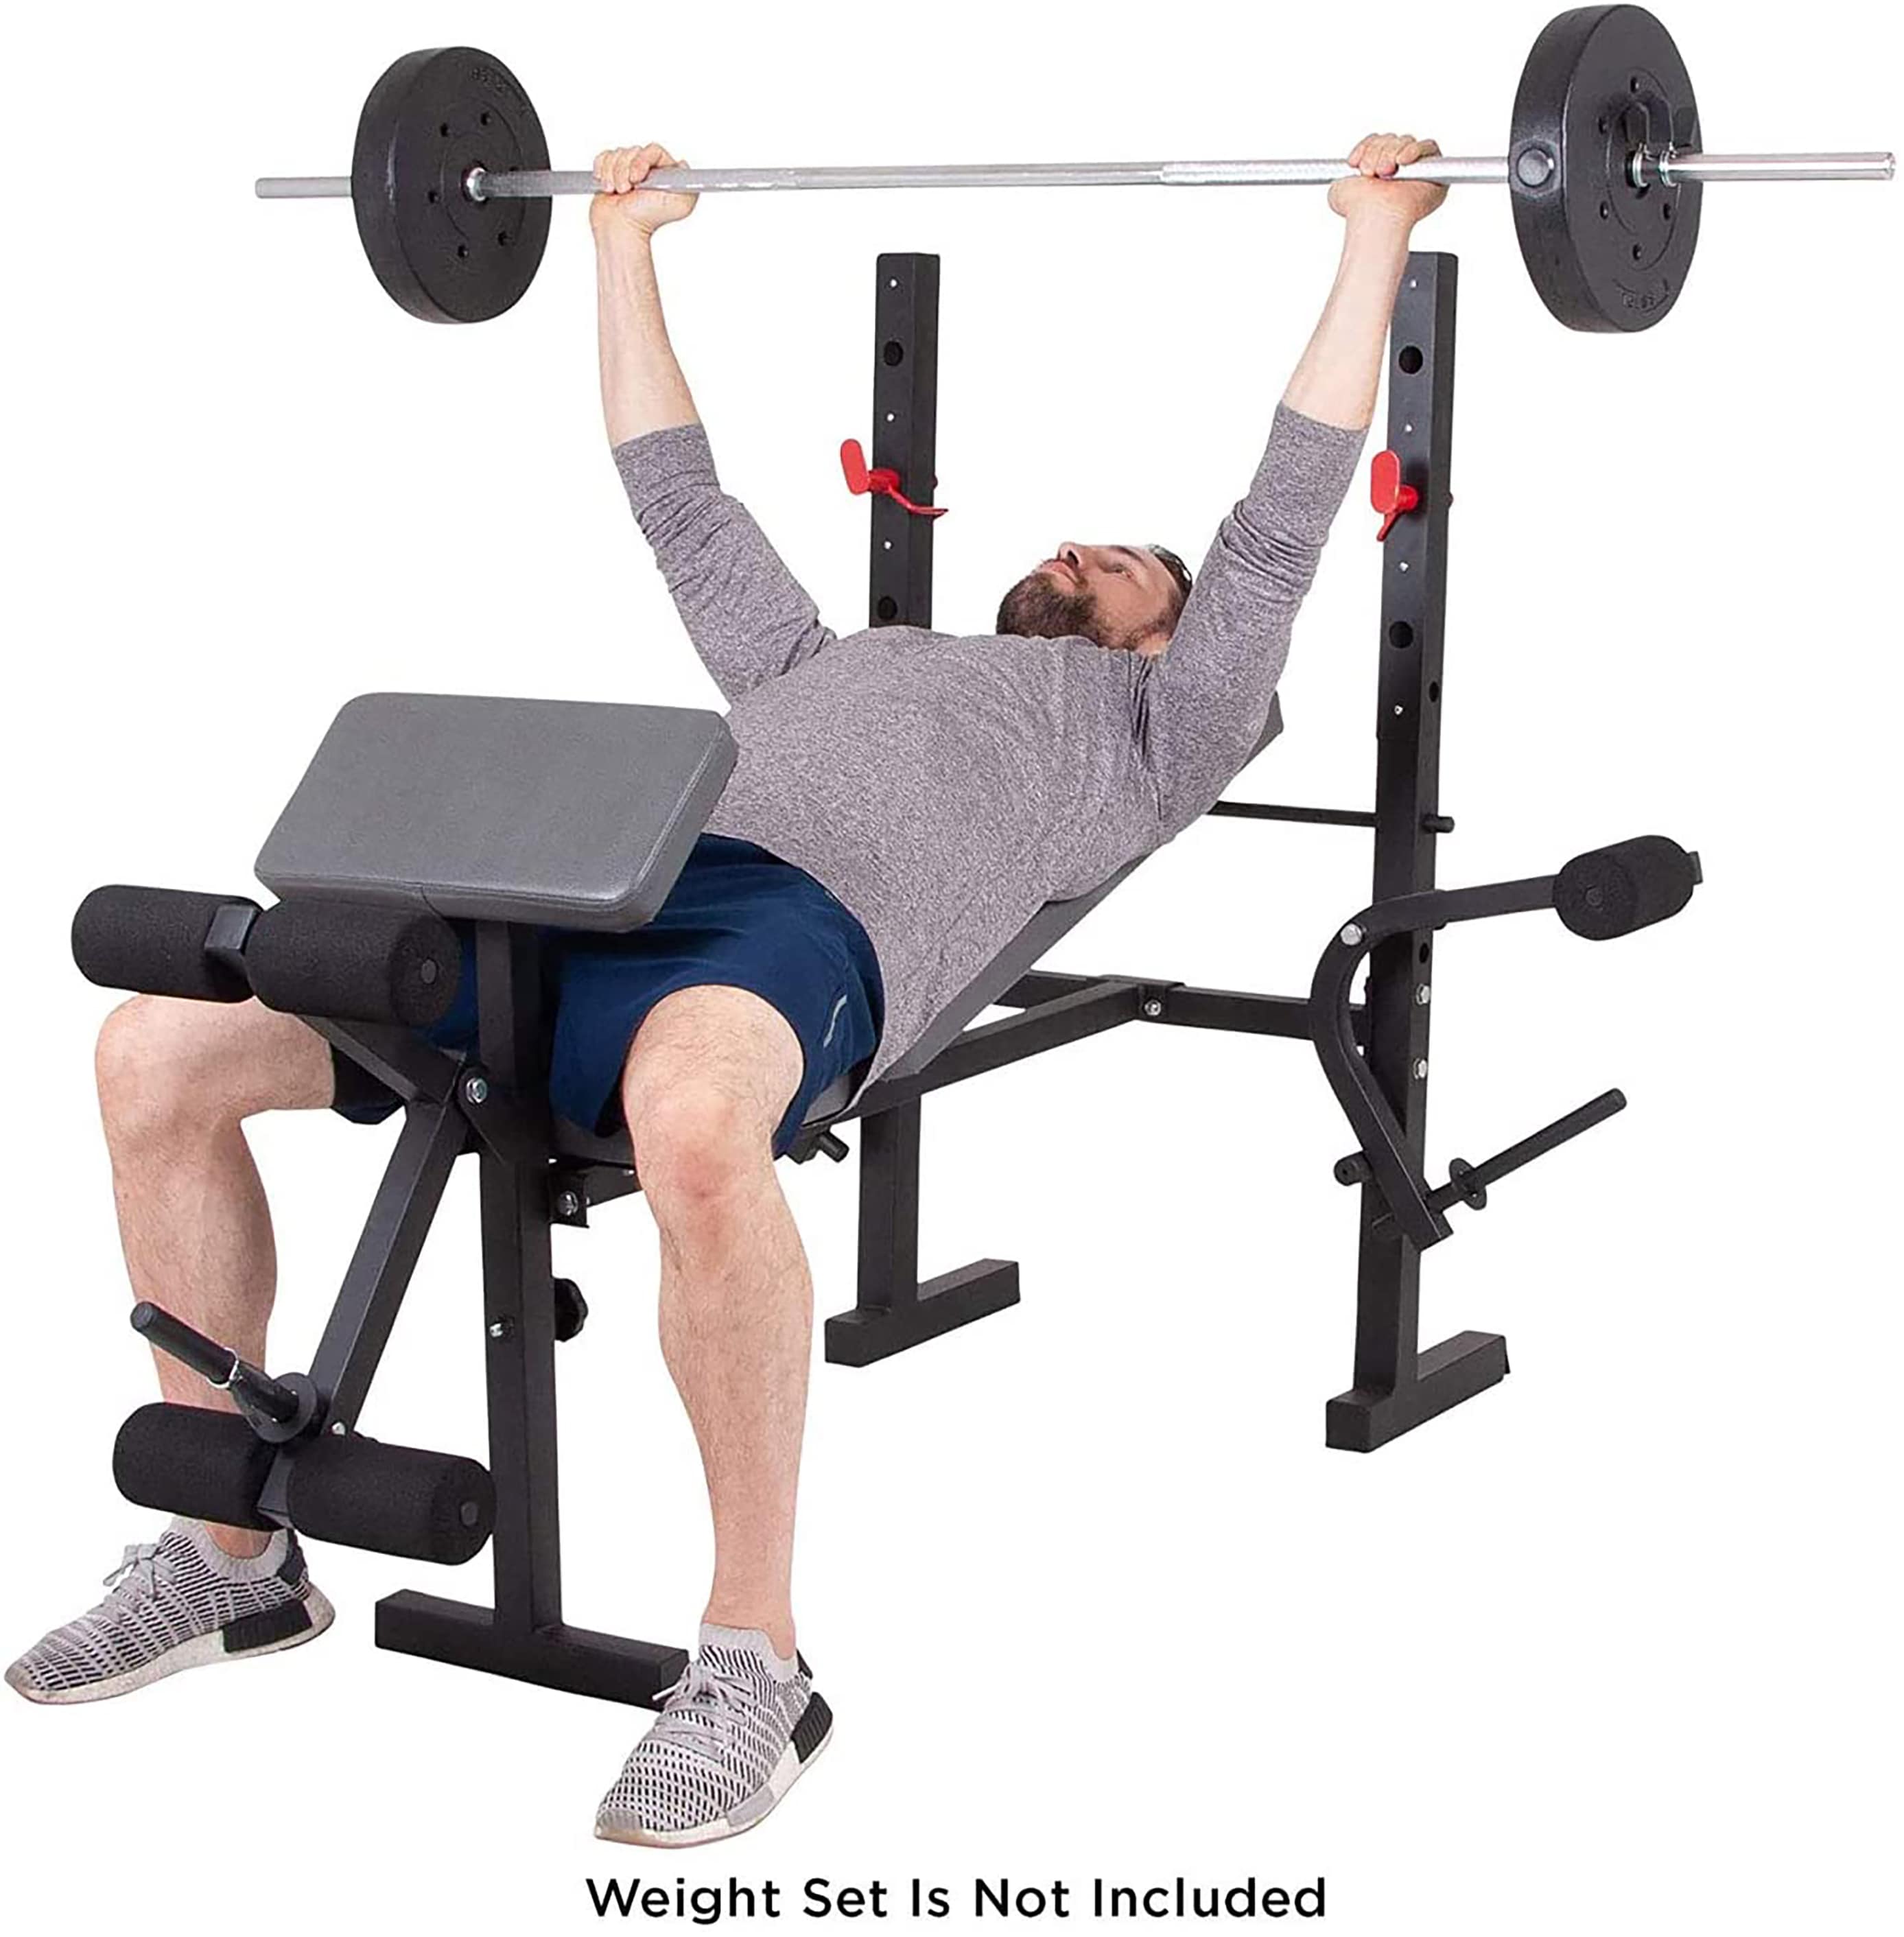 Buy the Body Champ BCB580 Standard Weight Bench with Free Shipping